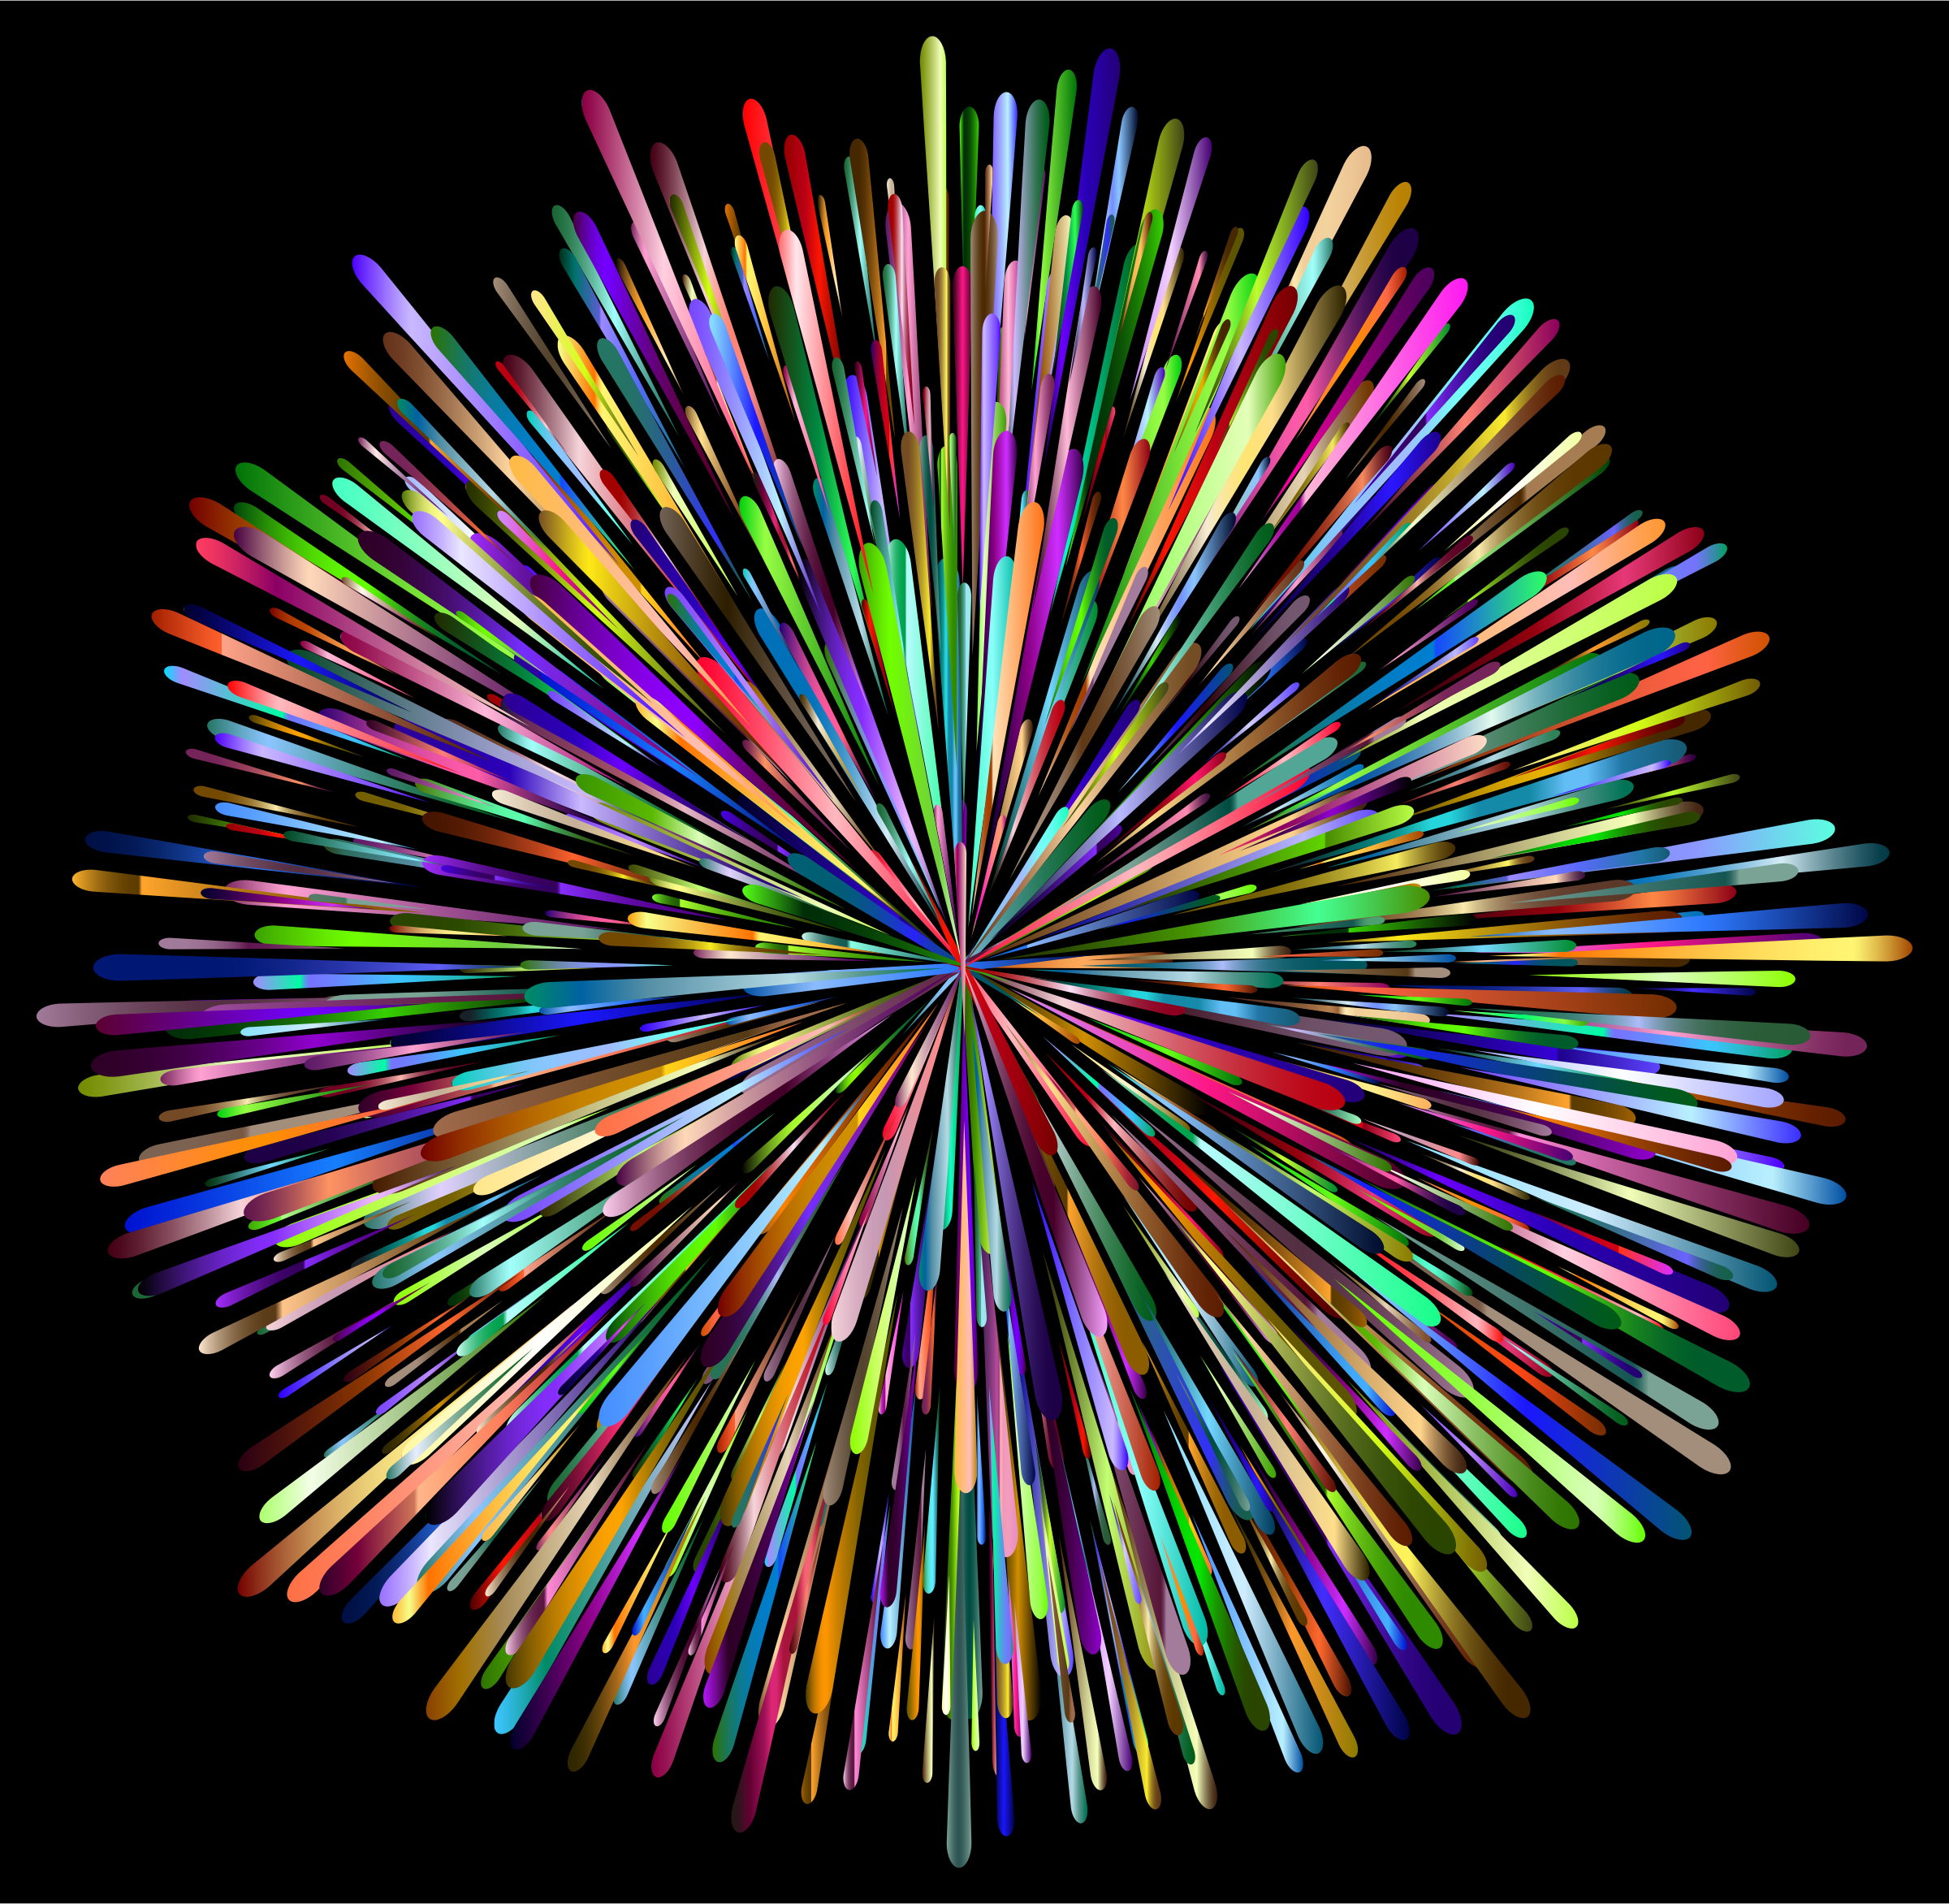 Download Prismatic Fireworks vector files image - Free stock photo - Public Domain photo - CC0 Images